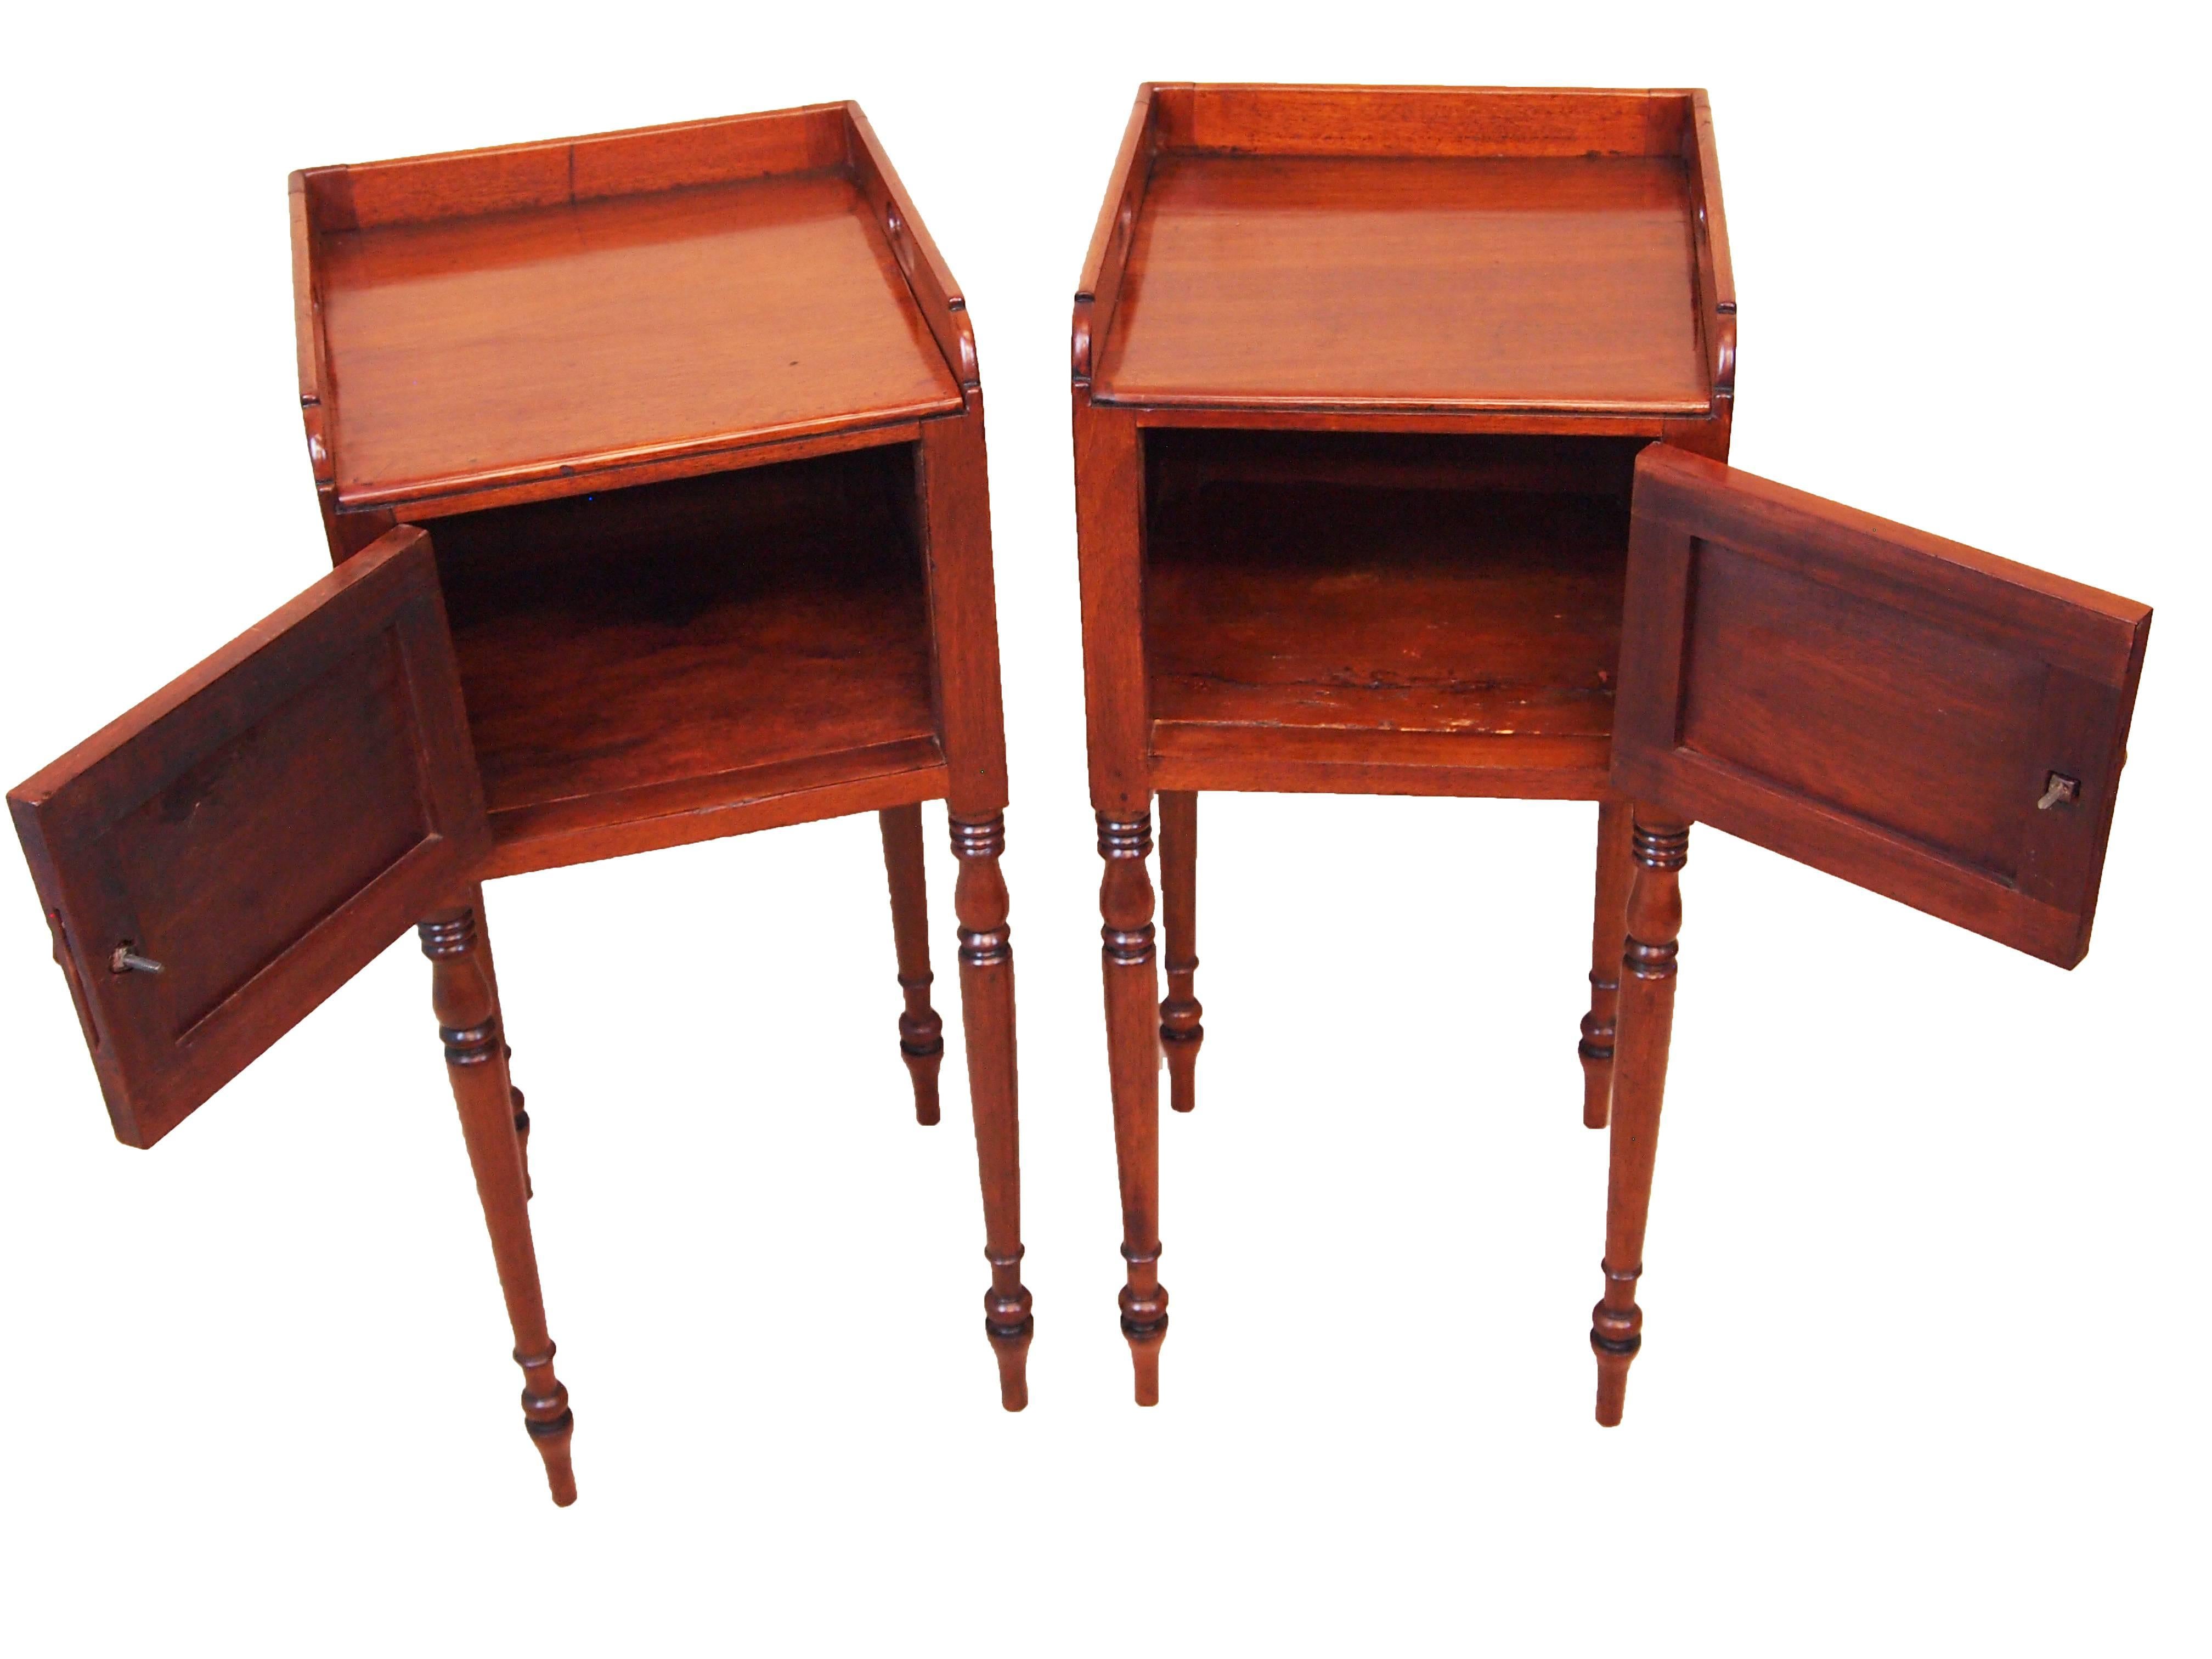 An extremely attractive pair of Regency period mahogany
bedside cupboards having well figured gallery tops
above panelled doors raised on elegant turned
tapering legs.